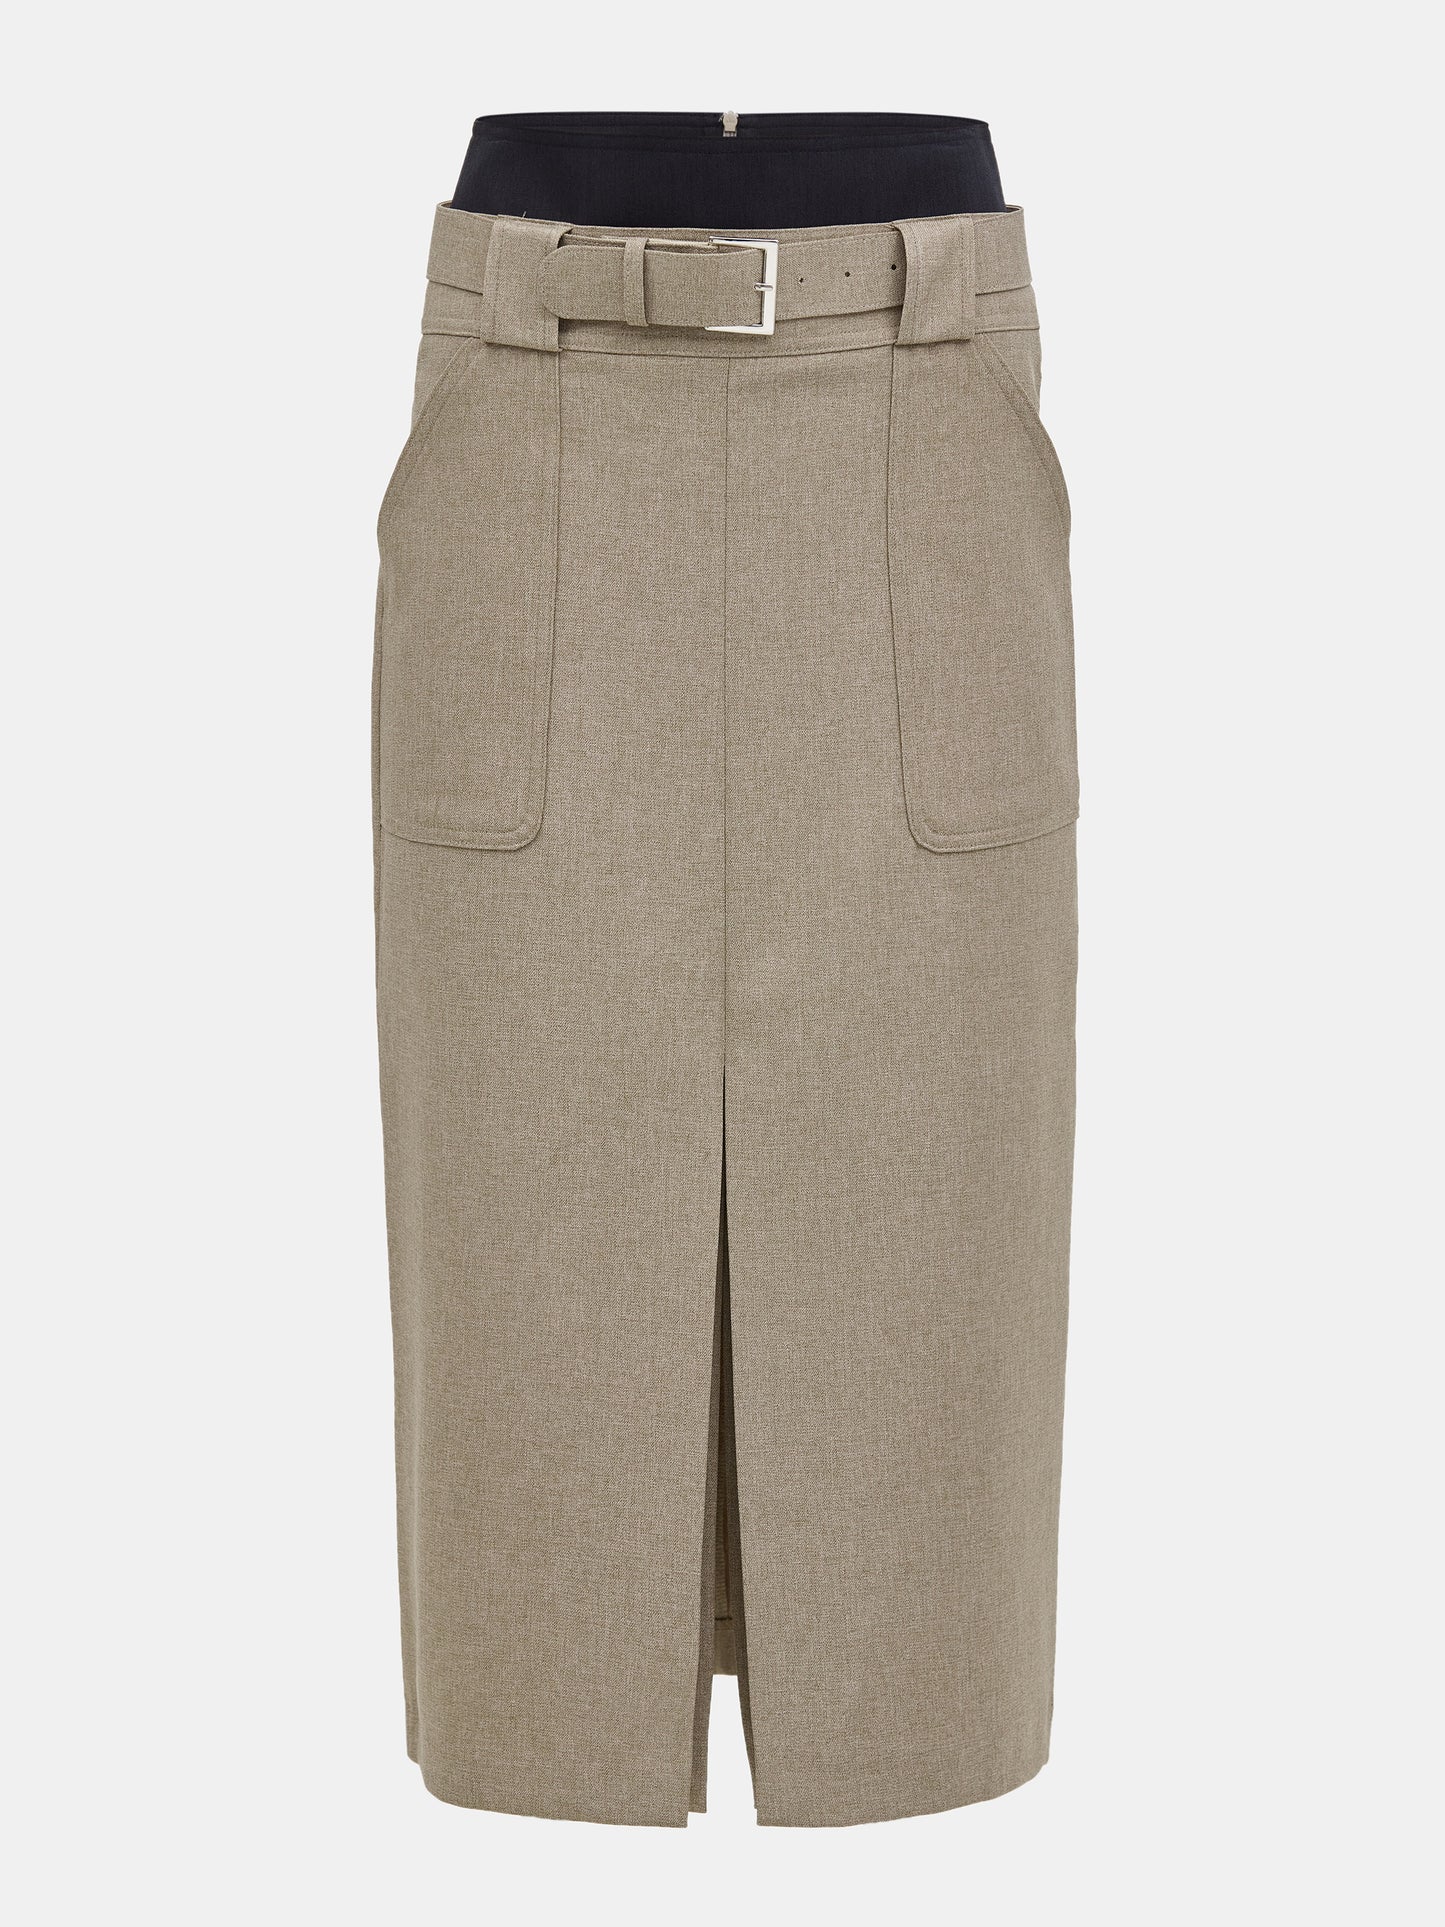 Belted Panel Suit Skirt, Cork